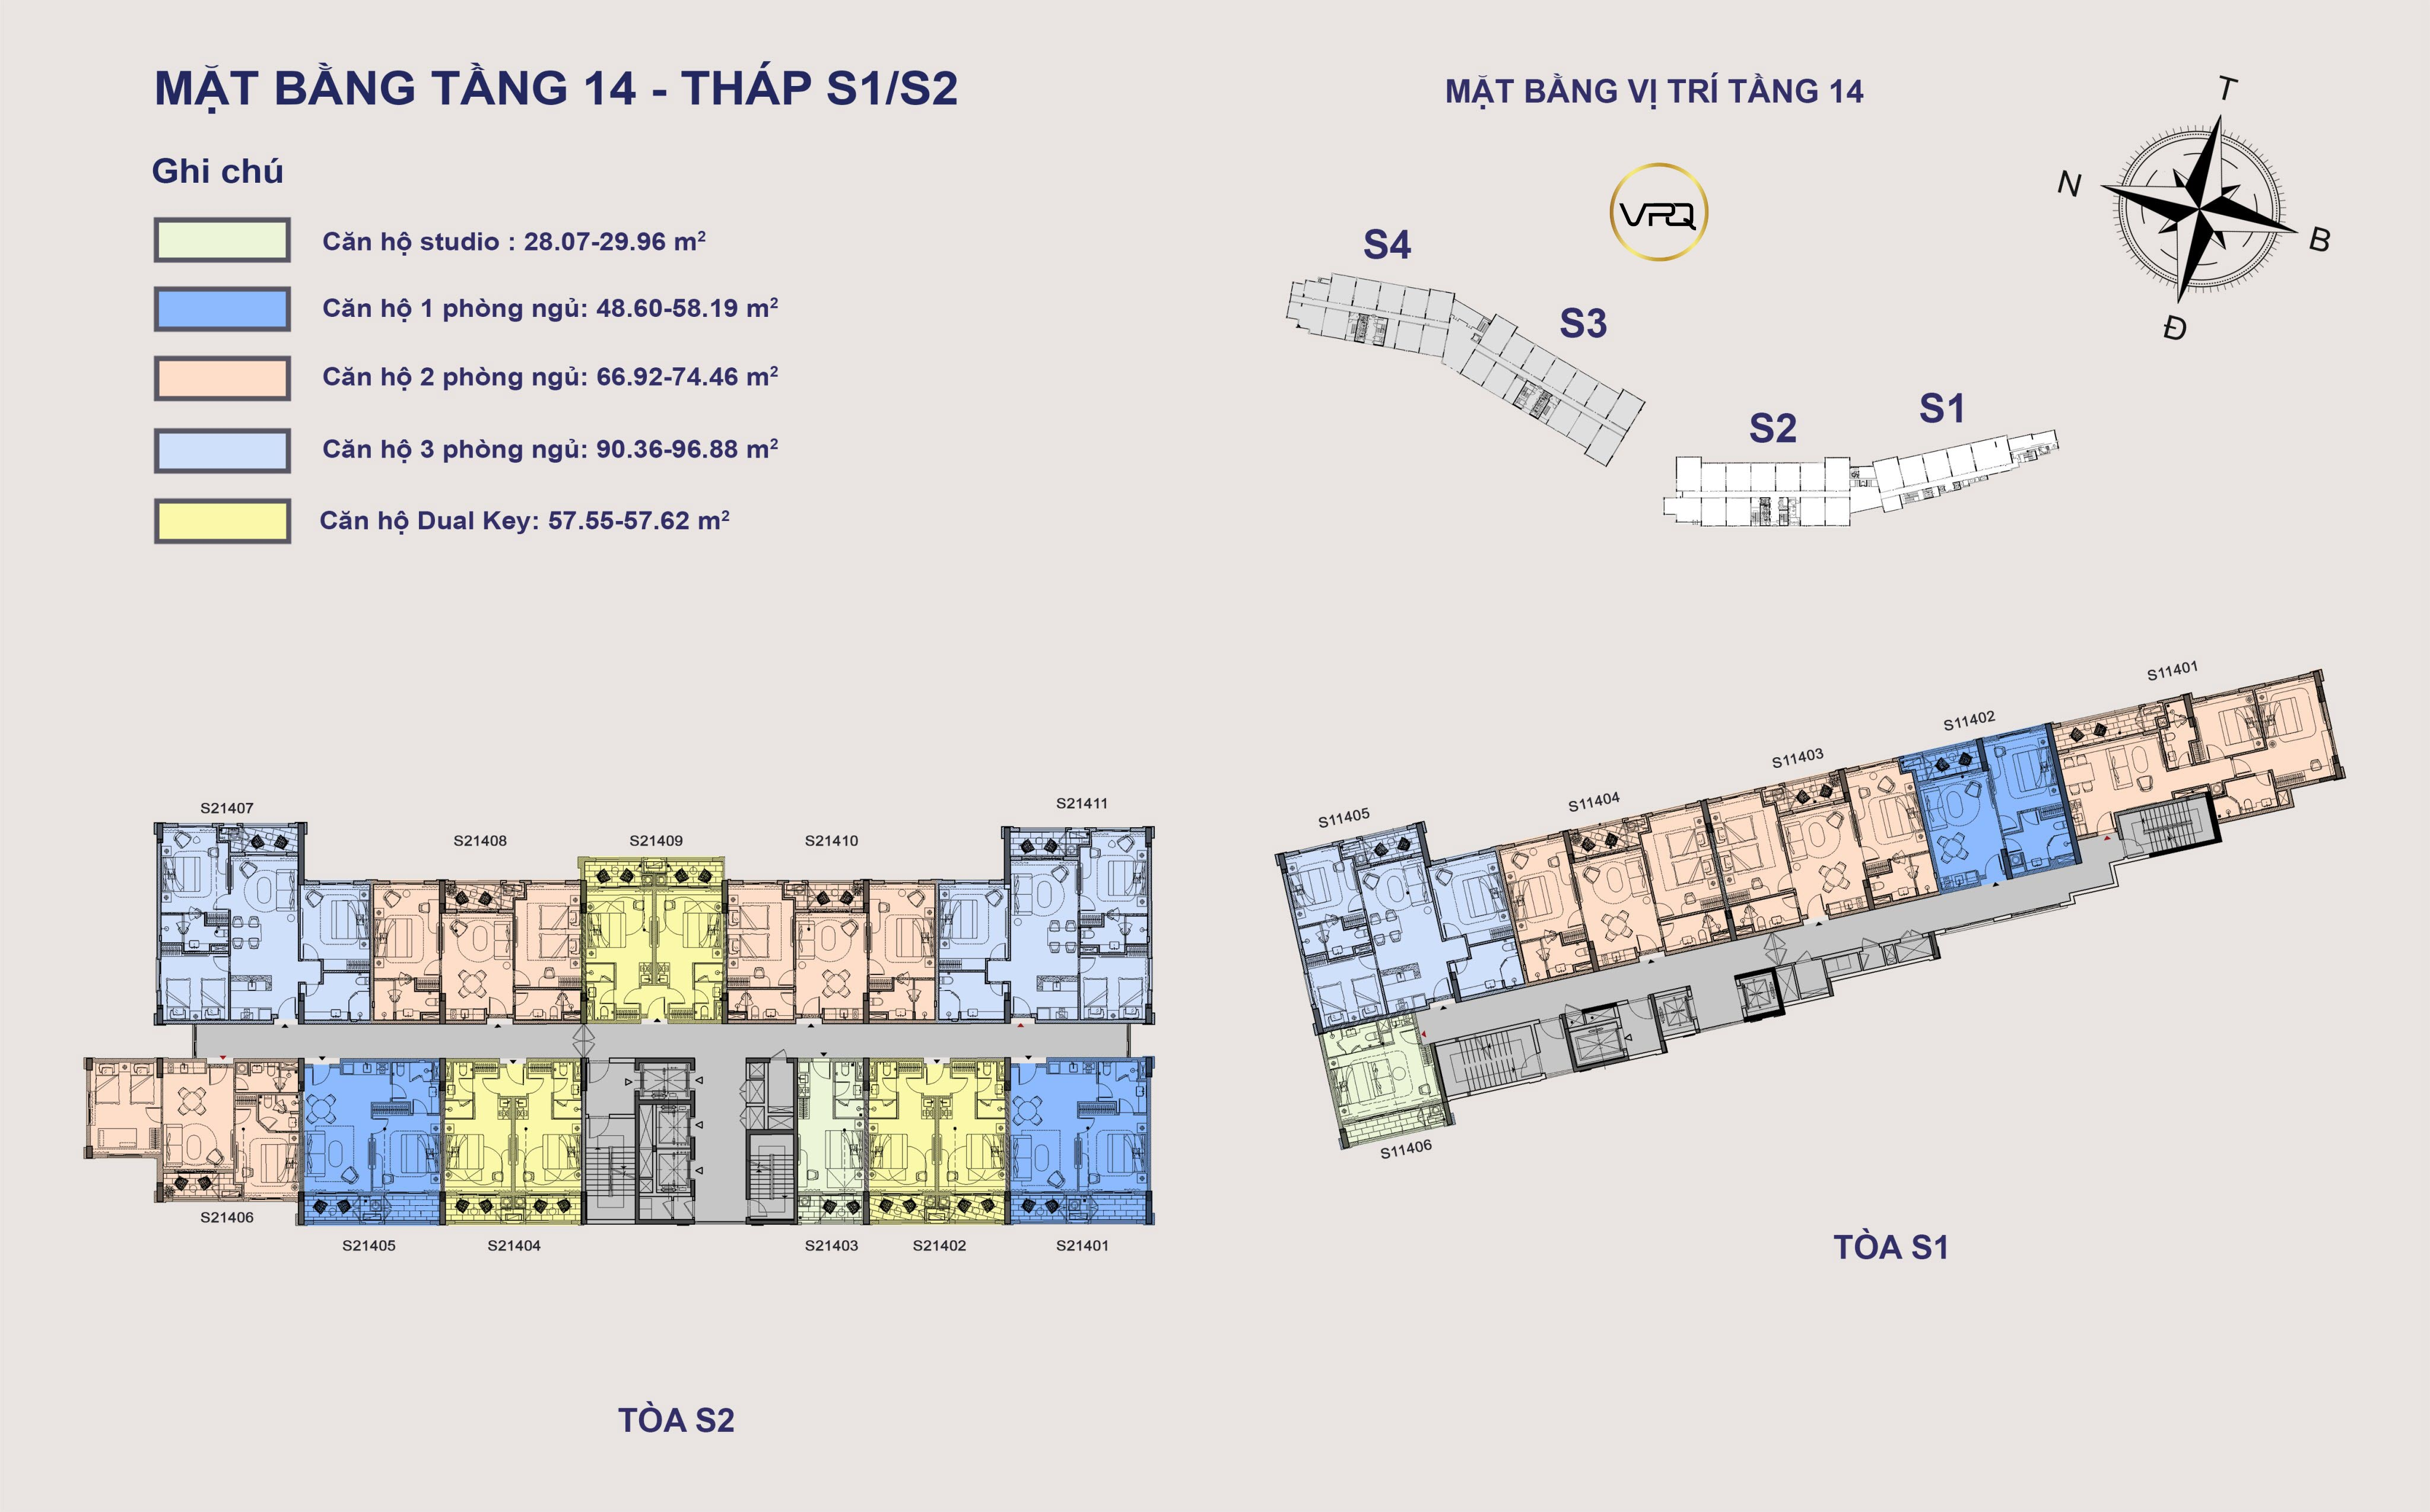 Layout mặt bằng tầng 14 The Sea Hillside tháp S1/S2